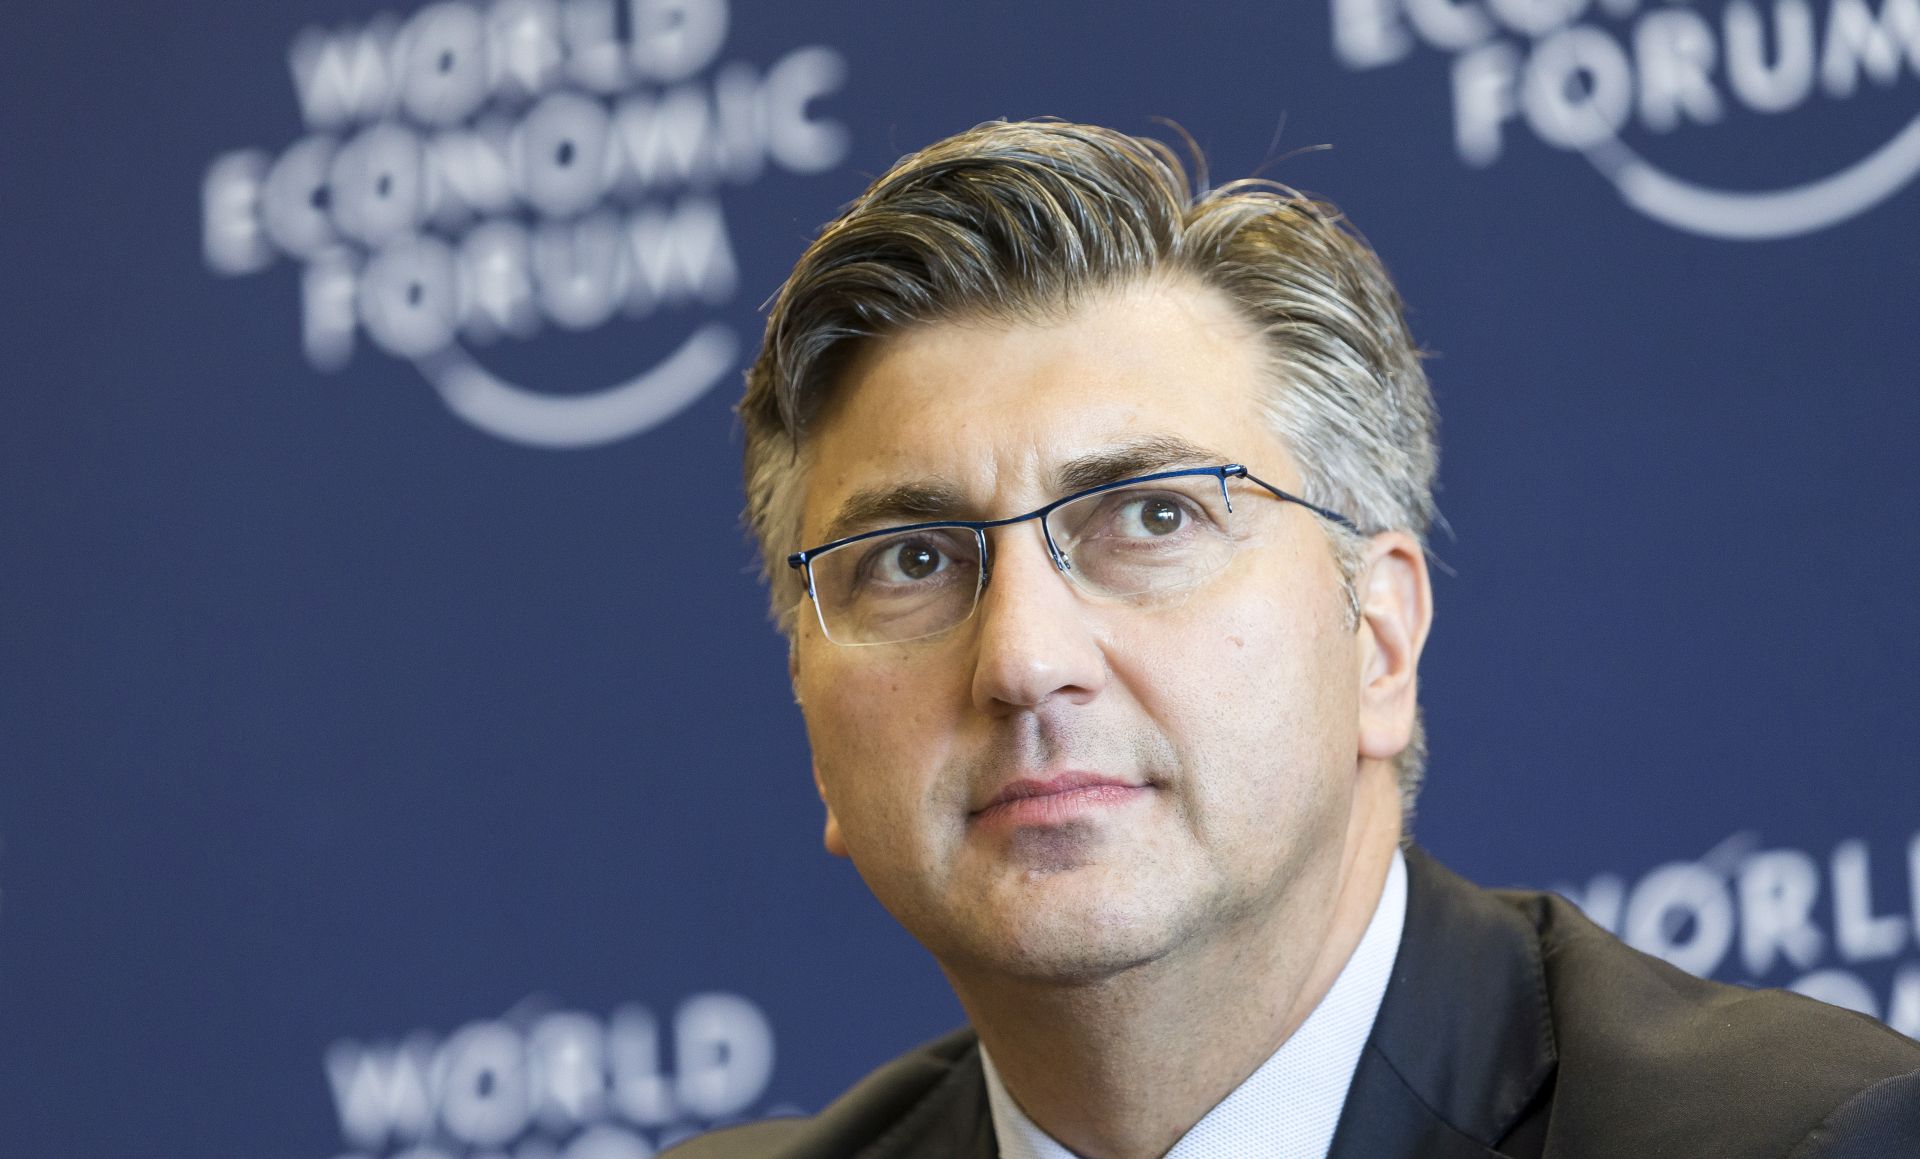 epa07063661 Andrej Plenkovic, Prime Minister of Croatia during the press conference after Strategic Dialogue on the Western Balkans on 02 October 2018 at the World Economic Forum headquarters in Cologny near Geneva, Switzerland. The World Economic Forum said leaders from Western Balkans committed to strengthen social and economic ties while preparing the region for the future.  EPA/CYRIL ZINGARO